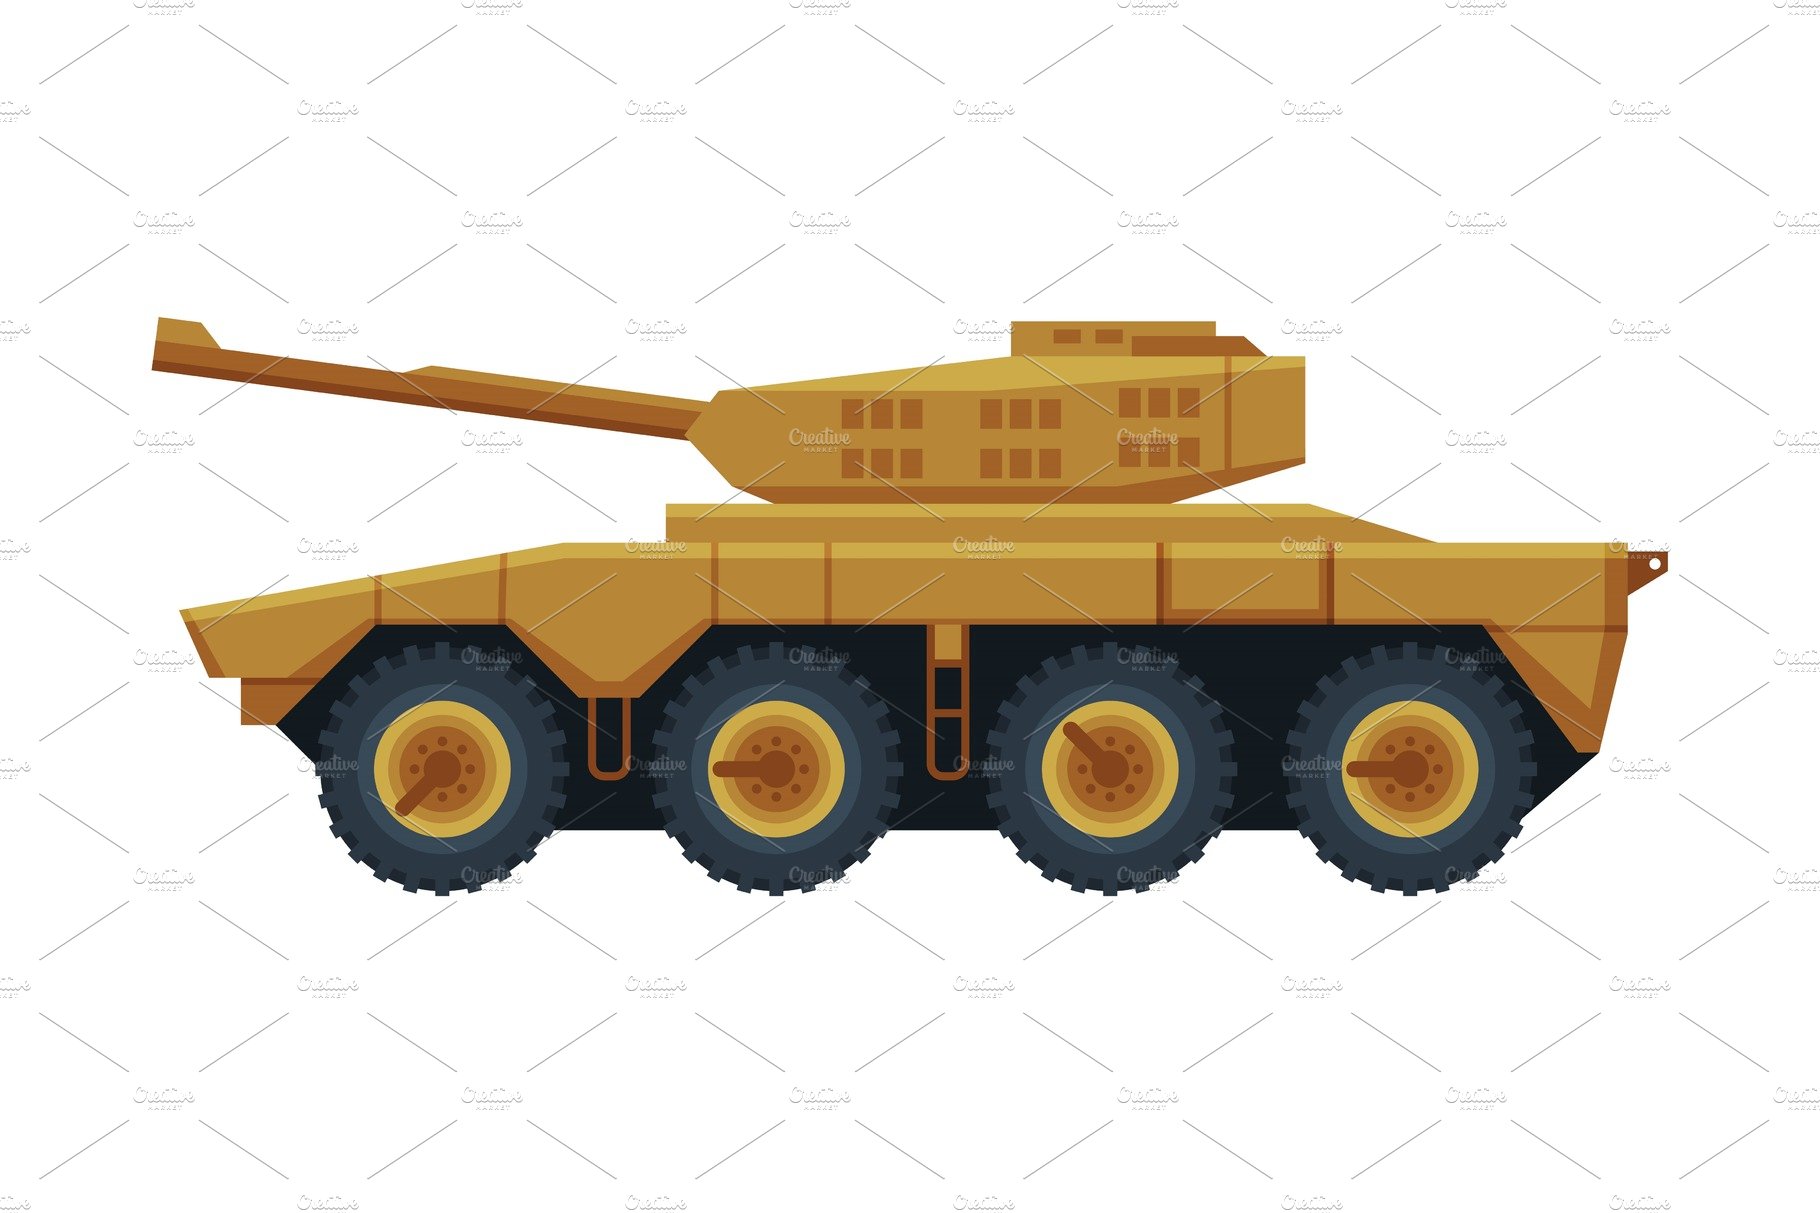 Armored Infantry Vehicle, Heavy cover image.